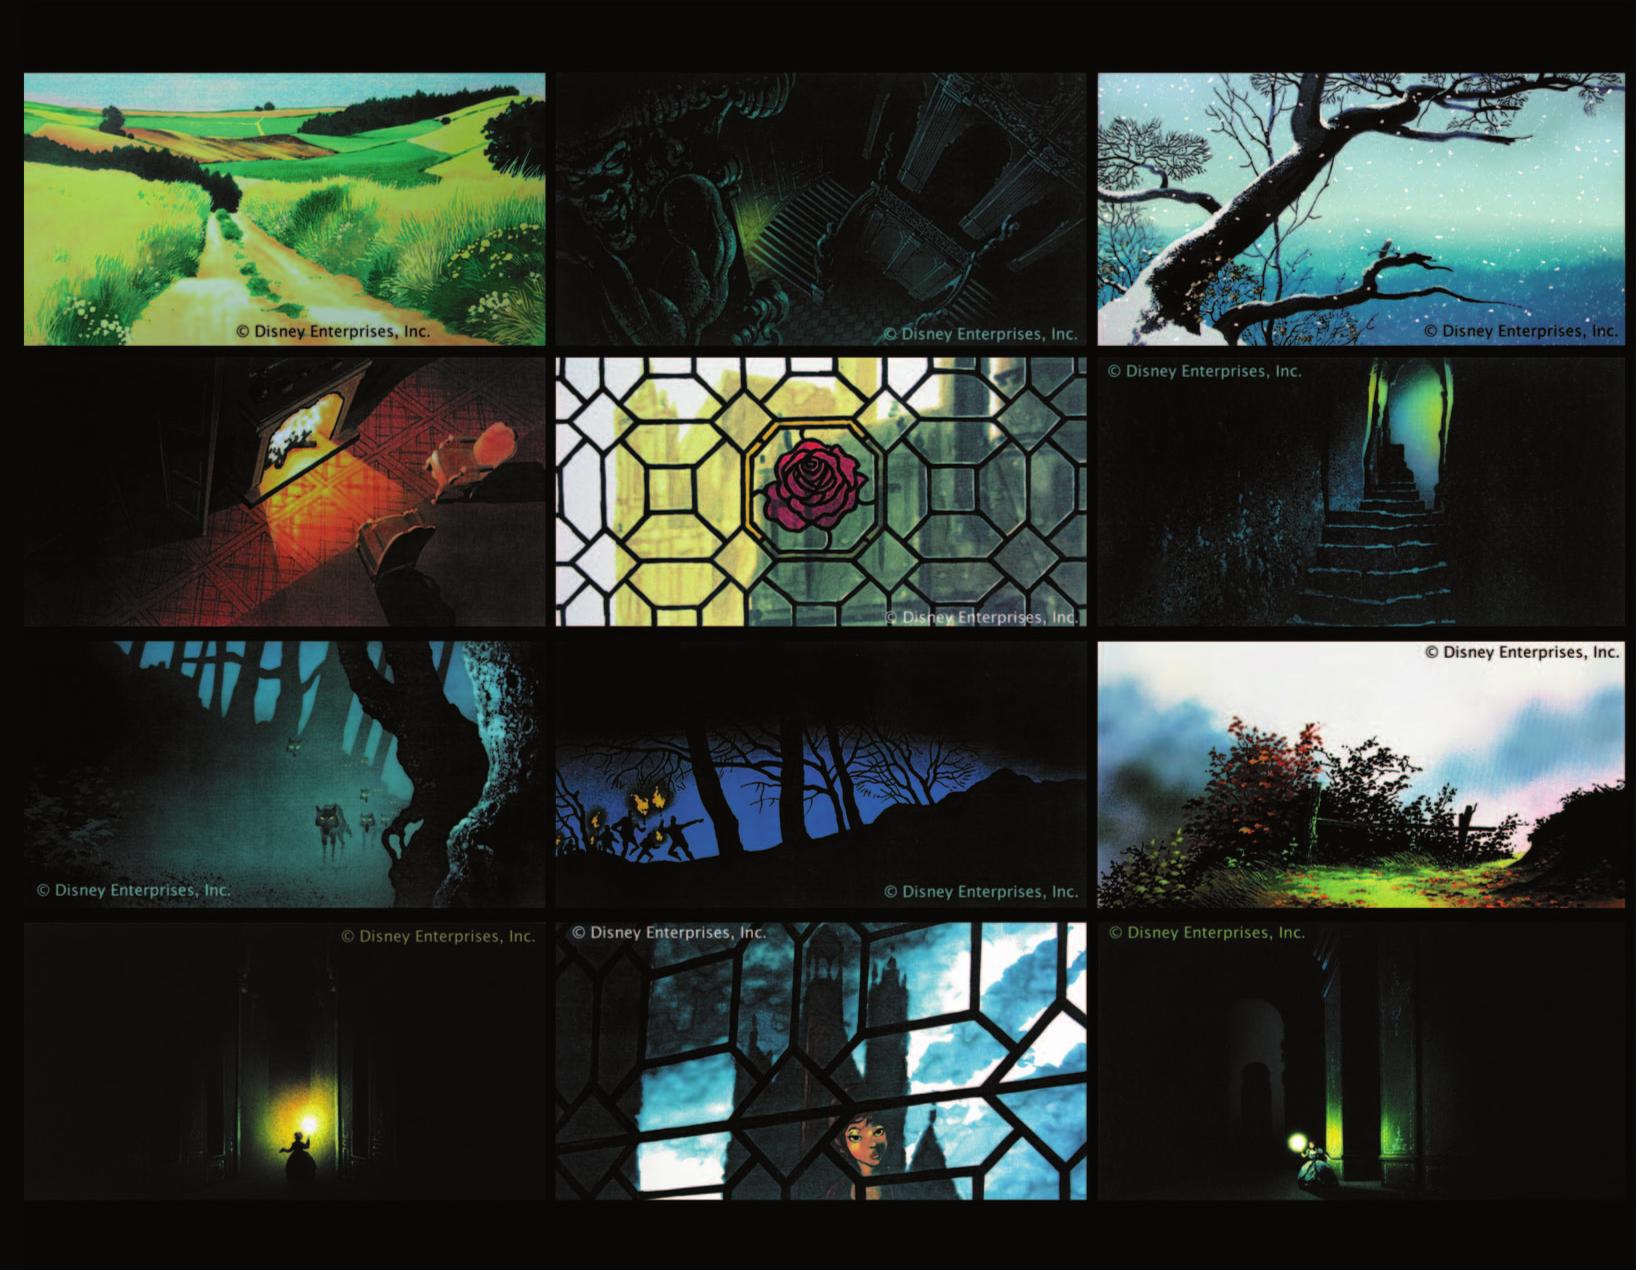 Dream Worlds: Production Design for Animation: Production Design in  Animation